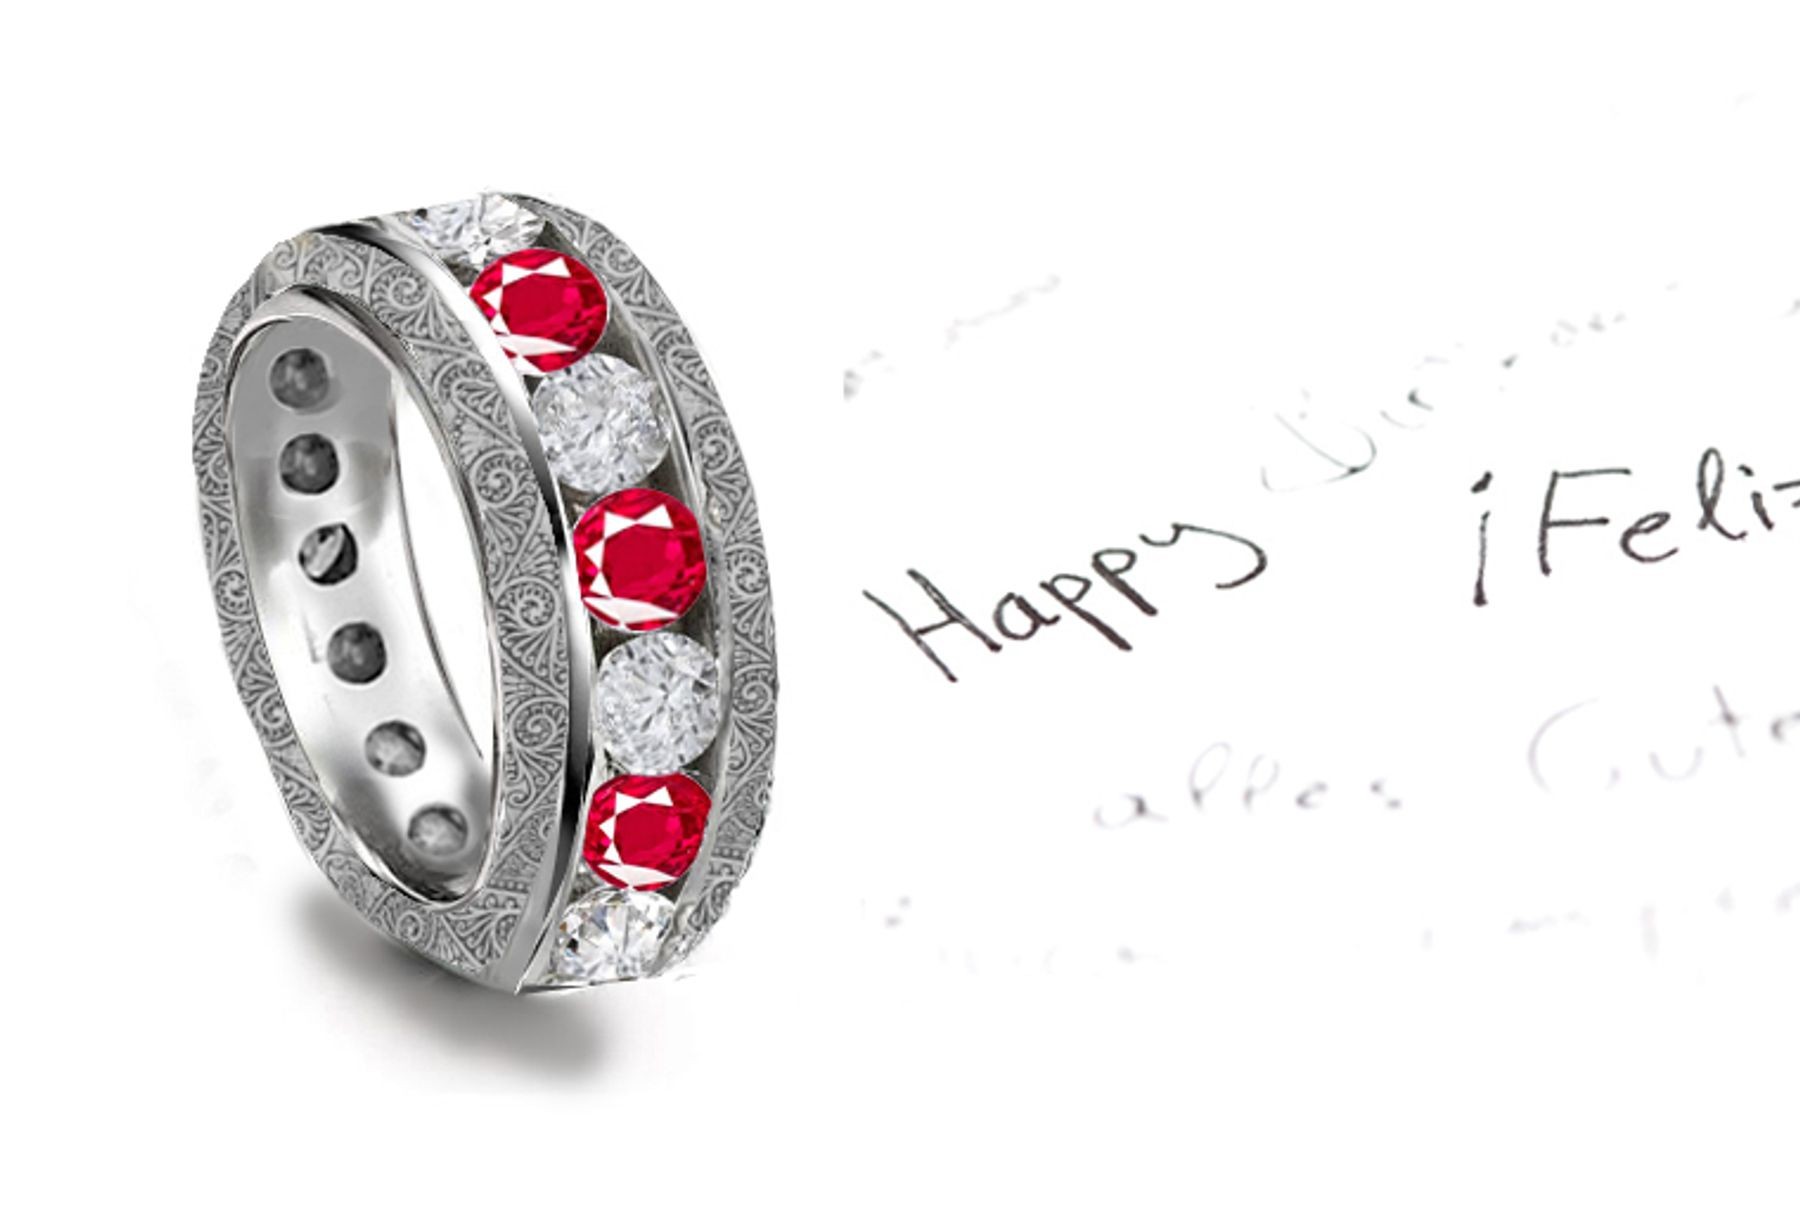 6mm Wide Diamond & Ruby Band Embossed with Floral Scrolls & Motifs in Platinum & 14k Gold